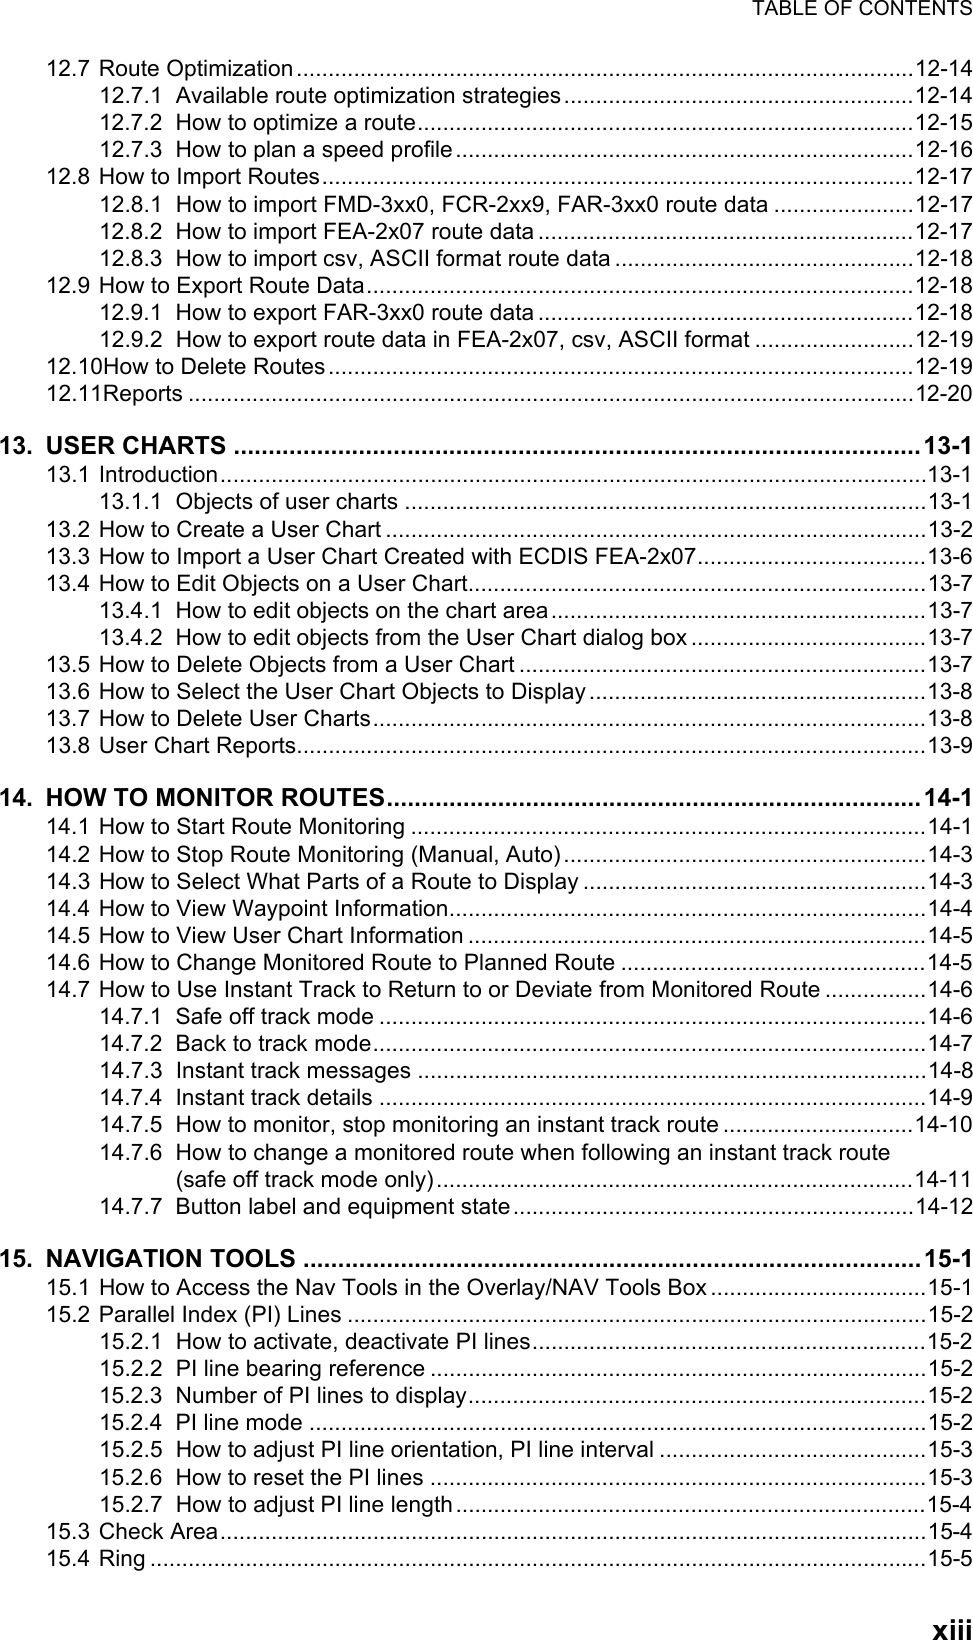 TABLE OF CONTENTSxiii12.7 Route Optimization.................................................................................................12-1412.7.1 Available route optimization strategies.......................................................12-1412.7.2 How to optimize a route..............................................................................12-1512.7.3 How to plan a speed profile........................................................................12-1612.8 How to Import Routes.............................................................................................12-1712.8.1 How to import FMD-3xx0, FCR-2xx9, FAR-3xx0 route data ......................12-1712.8.2 How to import FEA-2x07 route data ...........................................................12-1712.8.3 How to import csv, ASCII format route data ...............................................12-1812.9 How to Export Route Data......................................................................................12-1812.9.1 How to export FAR-3xx0 route data ...........................................................12-1812.9.2 How to export route data in FEA-2x07, csv, ASCII format .........................12-1912.10How to Delete Routes............................................................................................12-1912.11Reports ..................................................................................................................12-2013. USER CHARTS ...................................................................................................13-113.1 Introduction...............................................................................................................13-113.1.1 Objects of user charts ..................................................................................13-113.2 How to Create a User Chart .....................................................................................13-213.3 How to Import a User Chart Created with ECDIS FEA-2x07....................................13-613.4 How to Edit Objects on a User Chart........................................................................13-713.4.1 How to edit objects on the chart area...........................................................13-713.4.2 How to edit objects from the User Chart dialog box .....................................13-713.5 How to Delete Objects from a User Chart ................................................................13-713.6 How to Select the User Chart Objects to Display .....................................................13-813.7 How to Delete User Charts.......................................................................................13-813.8 User Chart Reports...................................................................................................13-914. HOW TO MONITOR ROUTES.............................................................................14-114.1 How to Start Route Monitoring .................................................................................14-114.2 How to Stop Route Monitoring (Manual, Auto).........................................................14-314.3 How to Select What Parts of a Route to Display ......................................................14-314.4 How to View Waypoint Information...........................................................................14-414.5 How to View User Chart Information ........................................................................14-514.6 How to Change Monitored Route to Planned Route ................................................14-514.7 How to Use Instant Track to Return to or Deviate from Monitored Route ................14-614.7.1 Safe off track mode ......................................................................................14-614.7.2 Back to track mode.......................................................................................14-714.7.3 Instant track messages ................................................................................14-814.7.4 Instant track details ......................................................................................14-914.7.5 How to monitor, stop monitoring an instant track route ..............................14-1014.7.6 How to change a monitored route when following an instant track route(safe off track mode only)...........................................................................14-1114.7.7 Button label and equipment state...............................................................14-1215. NAVIGATION TOOLS .........................................................................................15-115.1 How to Access the Nav Tools in the Overlay/NAV Tools Box ..................................15-115.2 Parallel Index (PI) Lines ...........................................................................................15-215.2.1 How to activate, deactivate PI lines..............................................................15-215.2.2 PI line bearing reference ..............................................................................15-215.2.3 Number of PI lines to display........................................................................15-215.2.4 PI line mode .................................................................................................15-215.2.5 How to adjust PI line orientation, PI line interval ..........................................15-315.2.6 How to reset the PI lines ..............................................................................15-315.2.7 How to adjust PI line length..........................................................................15-415.3 Check Area...............................................................................................................15-415.4 Ring ..........................................................................................................................15-5